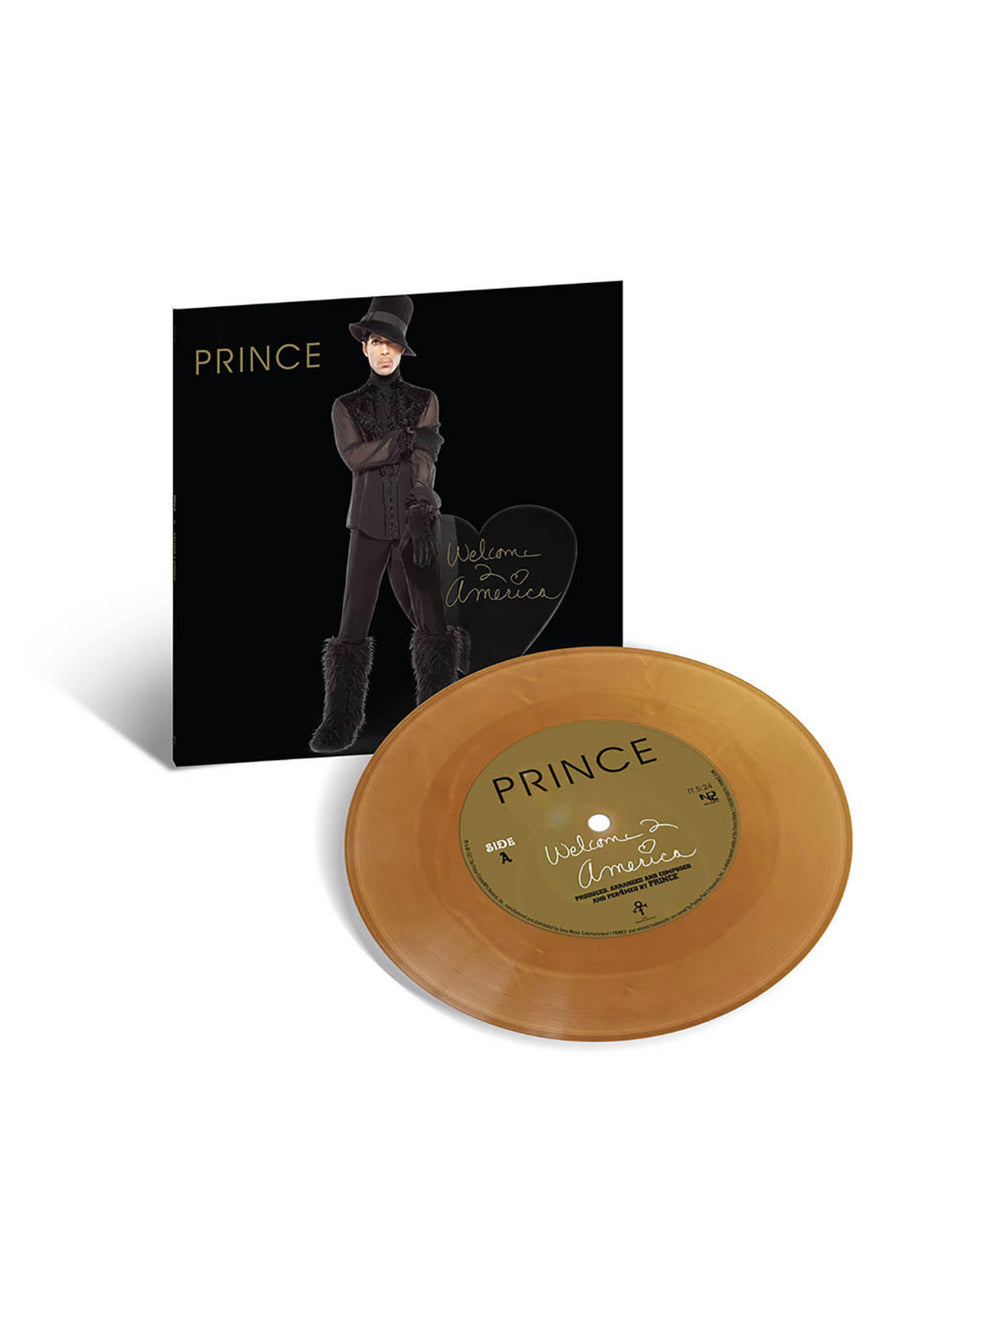 Prince – WELCOME 2 AMERICA 7 INCH SINGLE GOLD VINYL LTD ED NUMBER 003317